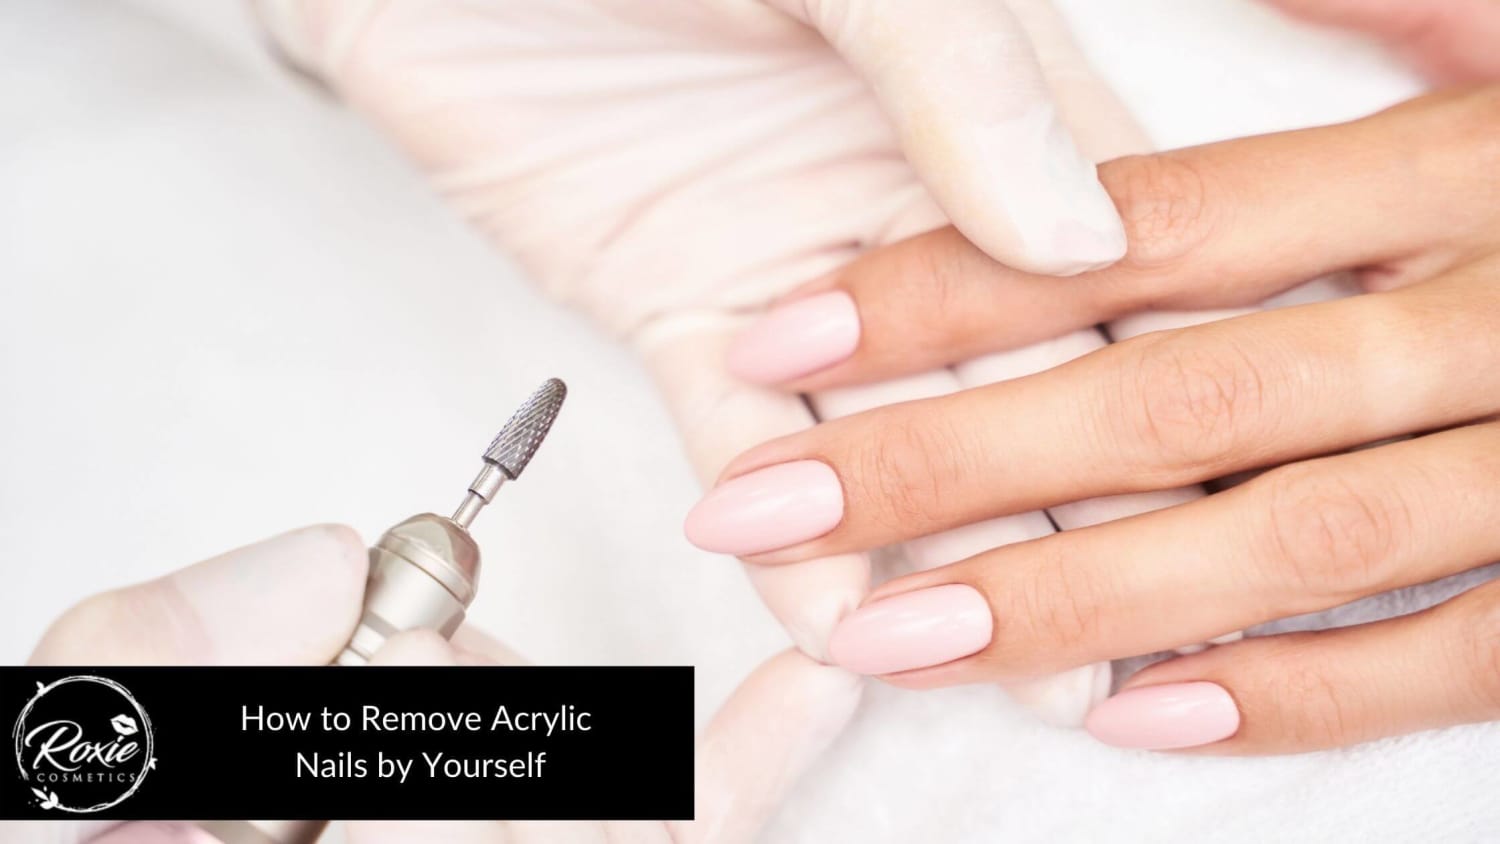 10 Uncomplicated Steps on How to Remove Acrylics Without Damaging Your Nails